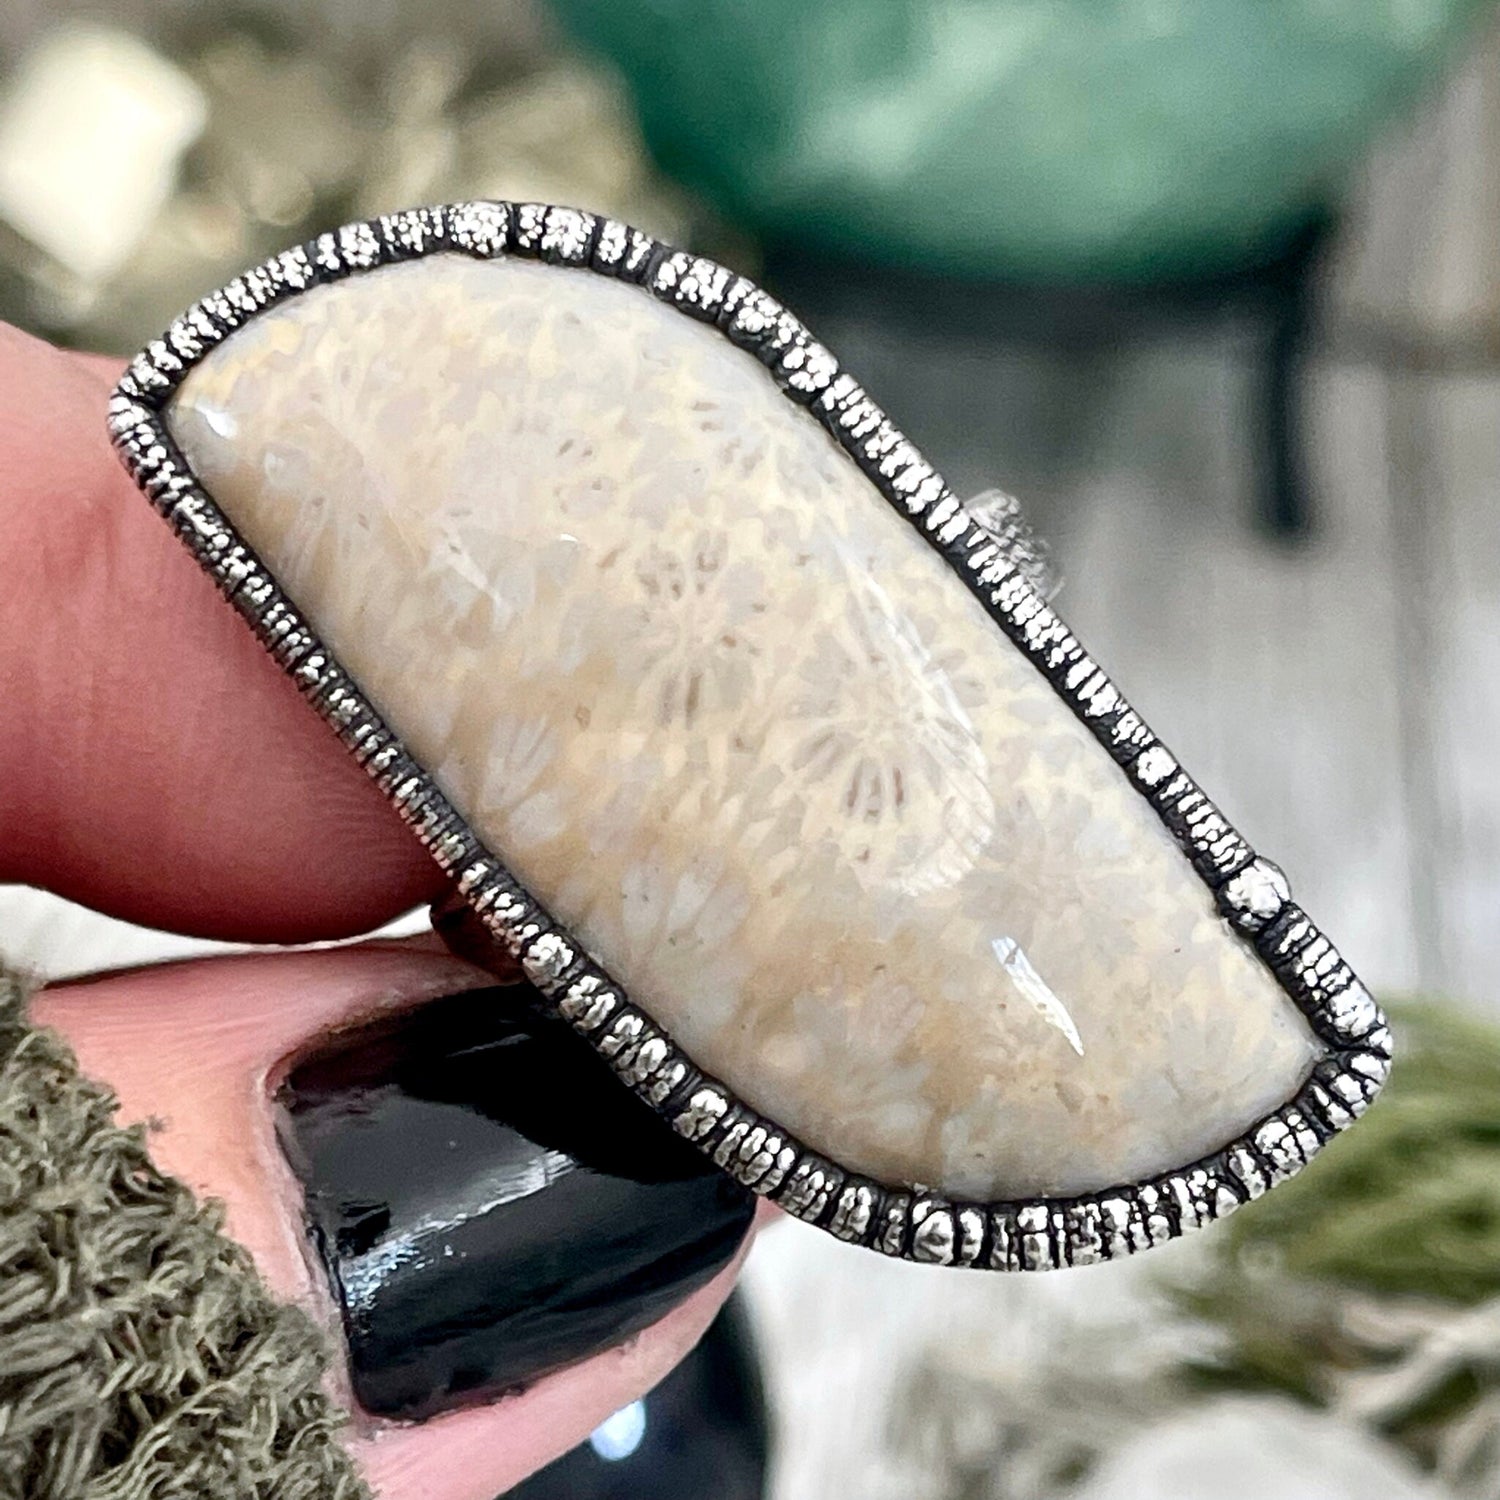 Size 10 Fossilized Coral Silver Statement Ring in Fine Silver / Foxlark Collection - One of a Kind / Big Crystal Ring Witchy Jewelry